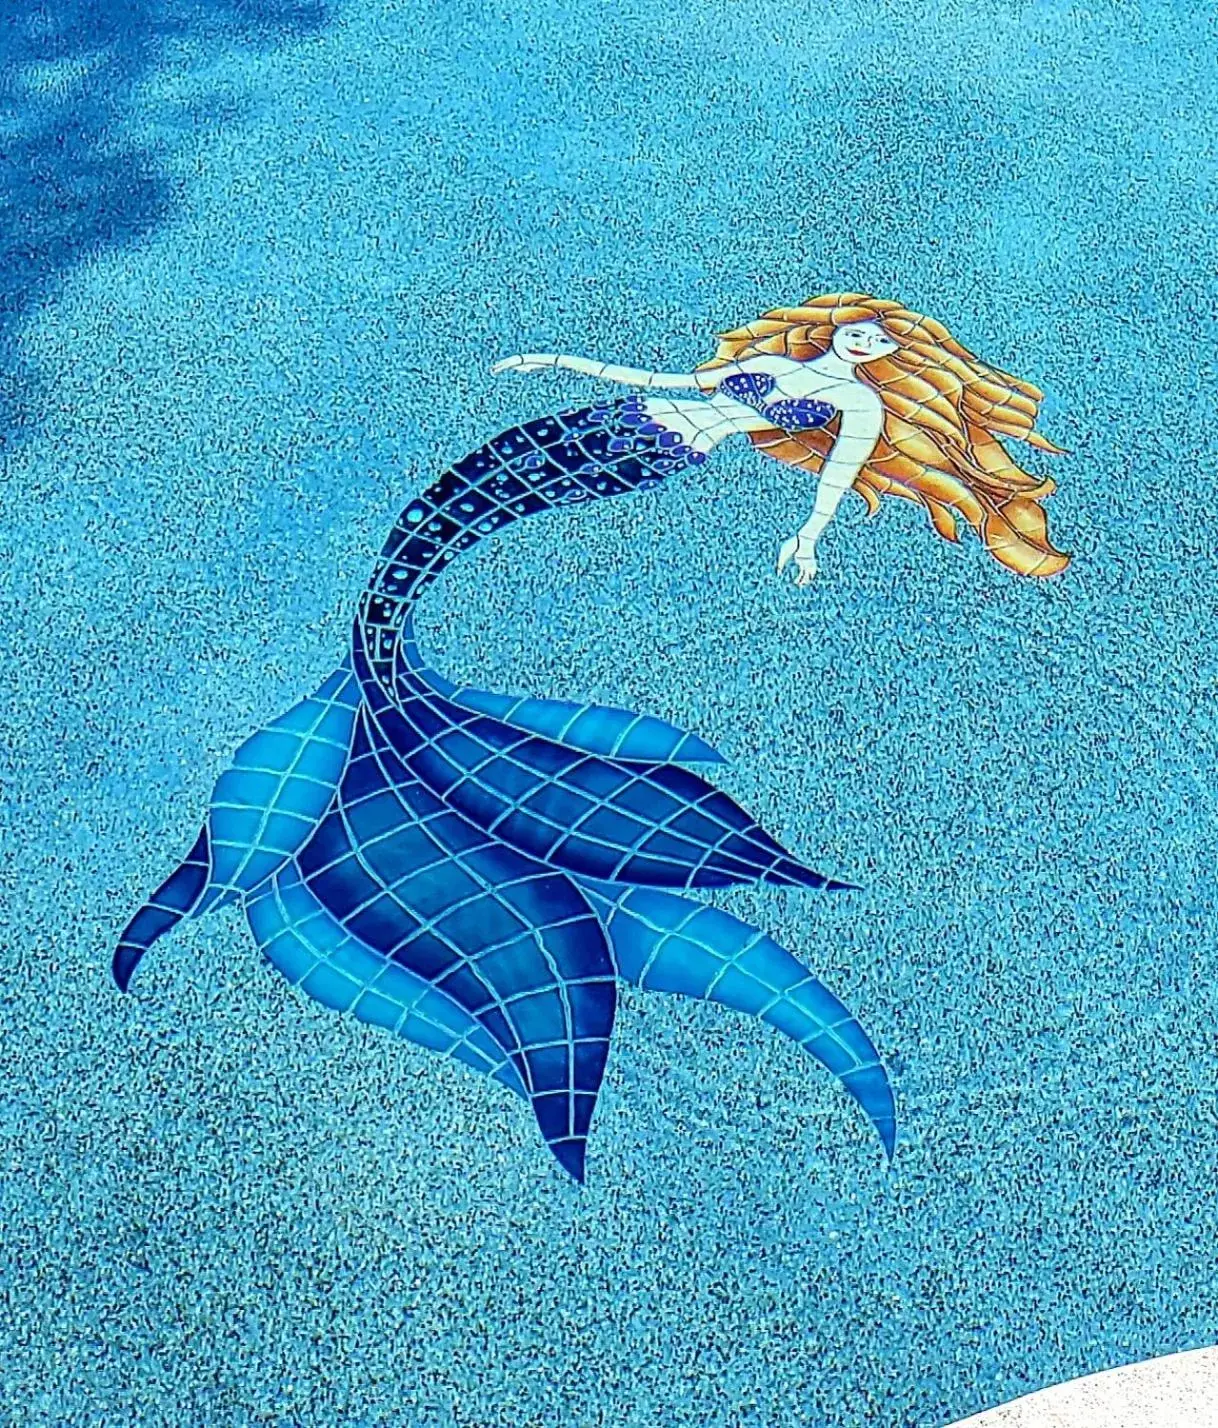 Swimming pool, Other Animals in Annabell Gardens